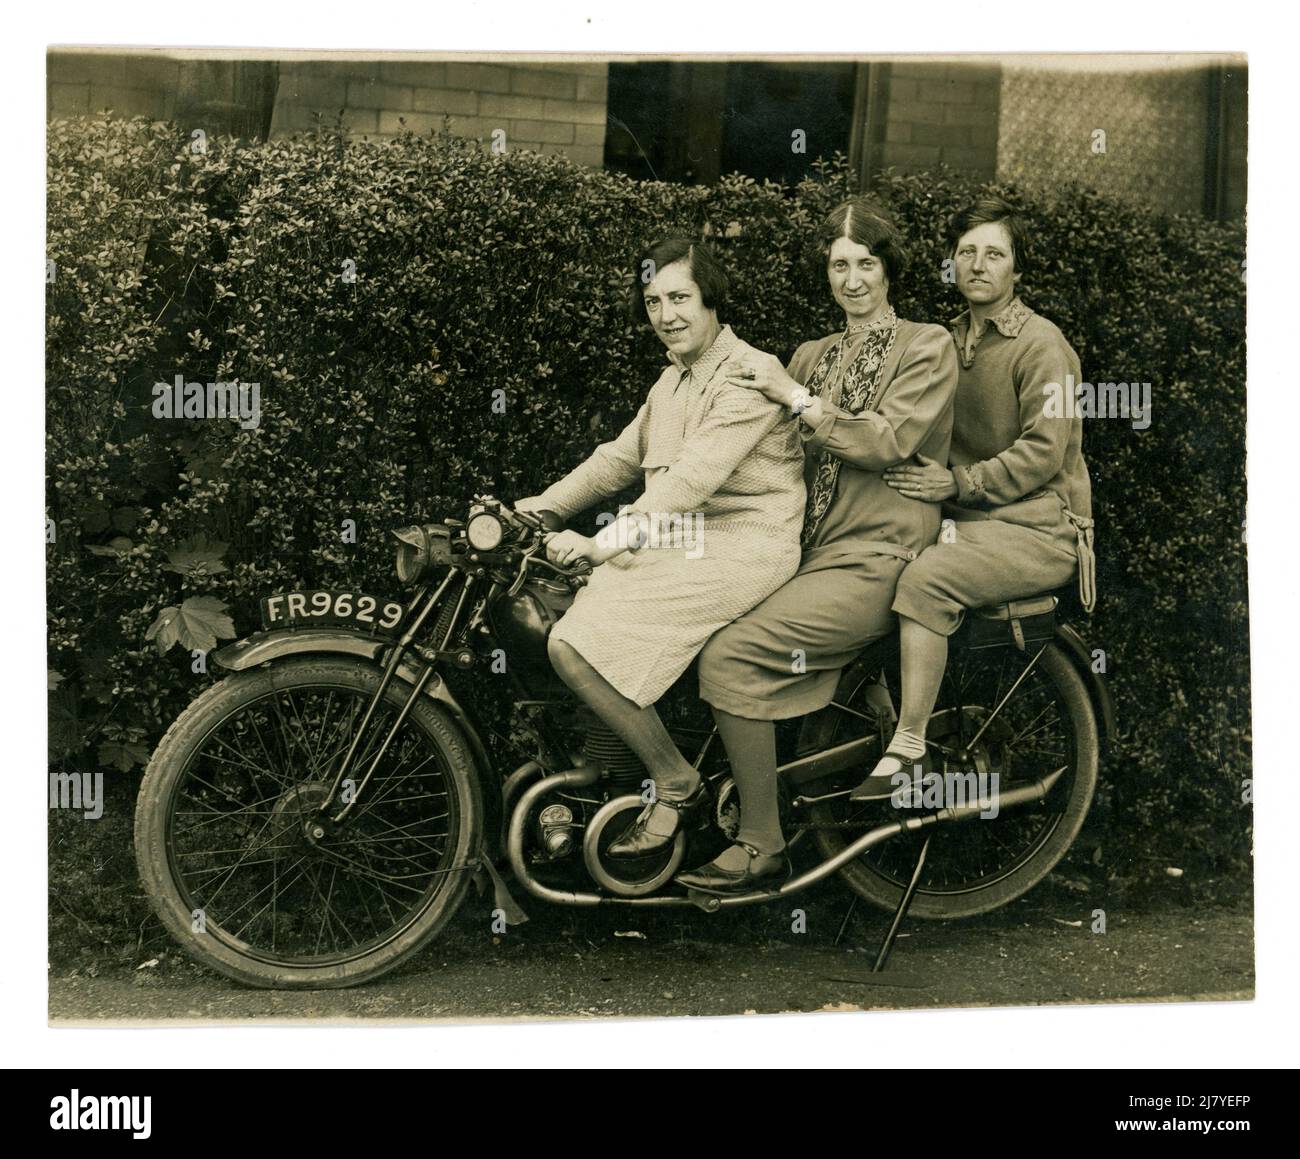 Original, humorous 1920's postcard of 3 mature / middle aged women, friends,  posing sitting together on a motorcycle, riding pillion, enjoying themselves on holiday at the seaside resort of Blackpool, Lancashire, U.K. dated 1 May 1929, Stock Photo